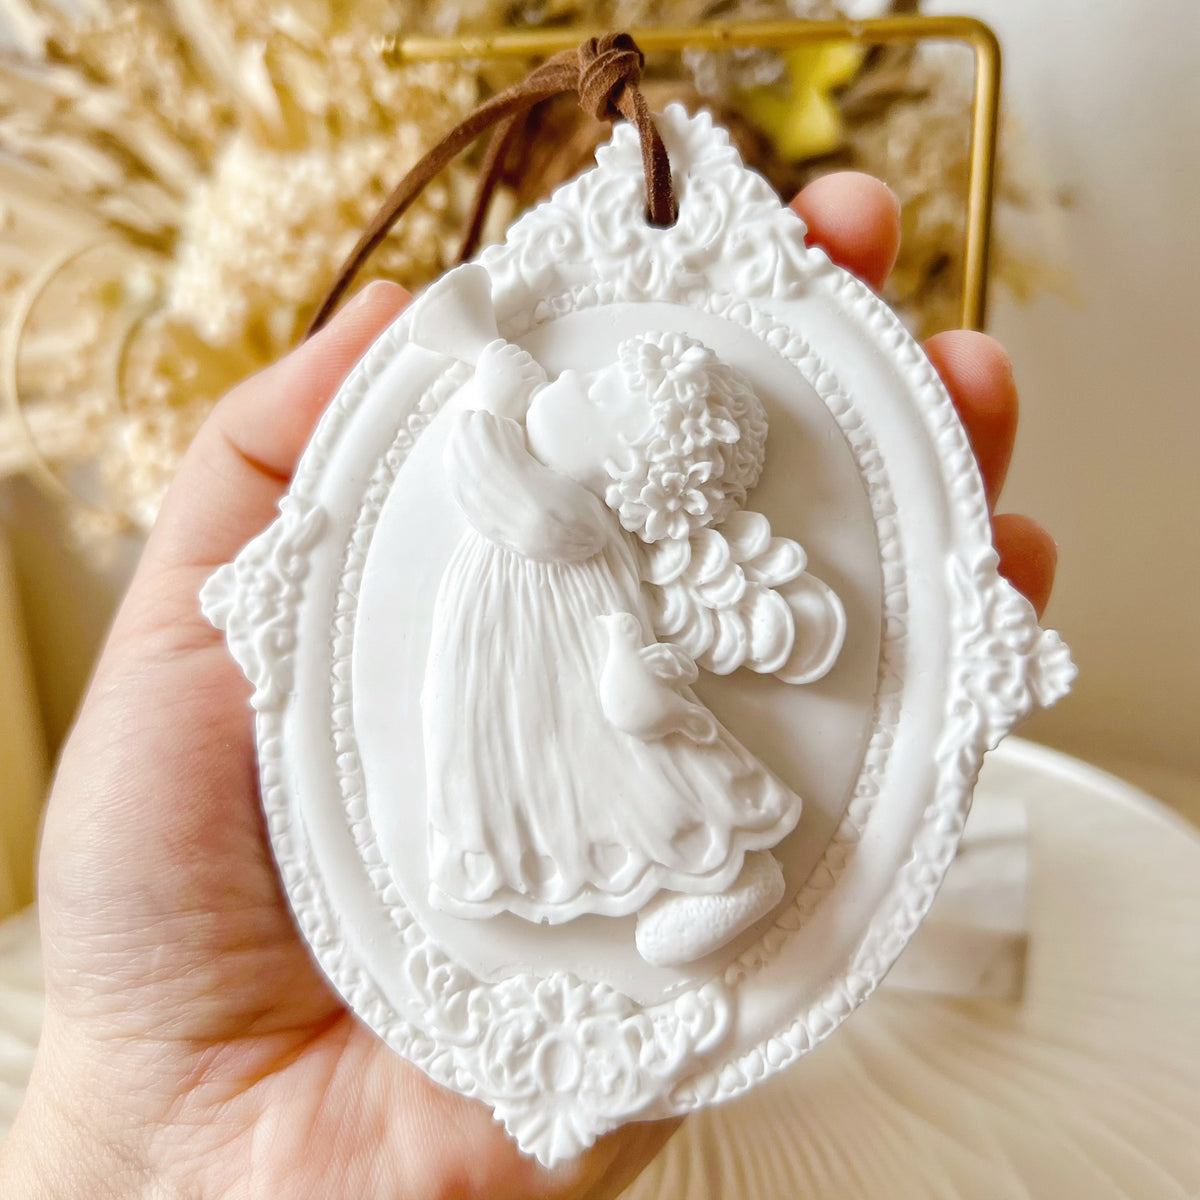 Handmade Angel With Horn Home Hanging Diffuser | LMJ Candles